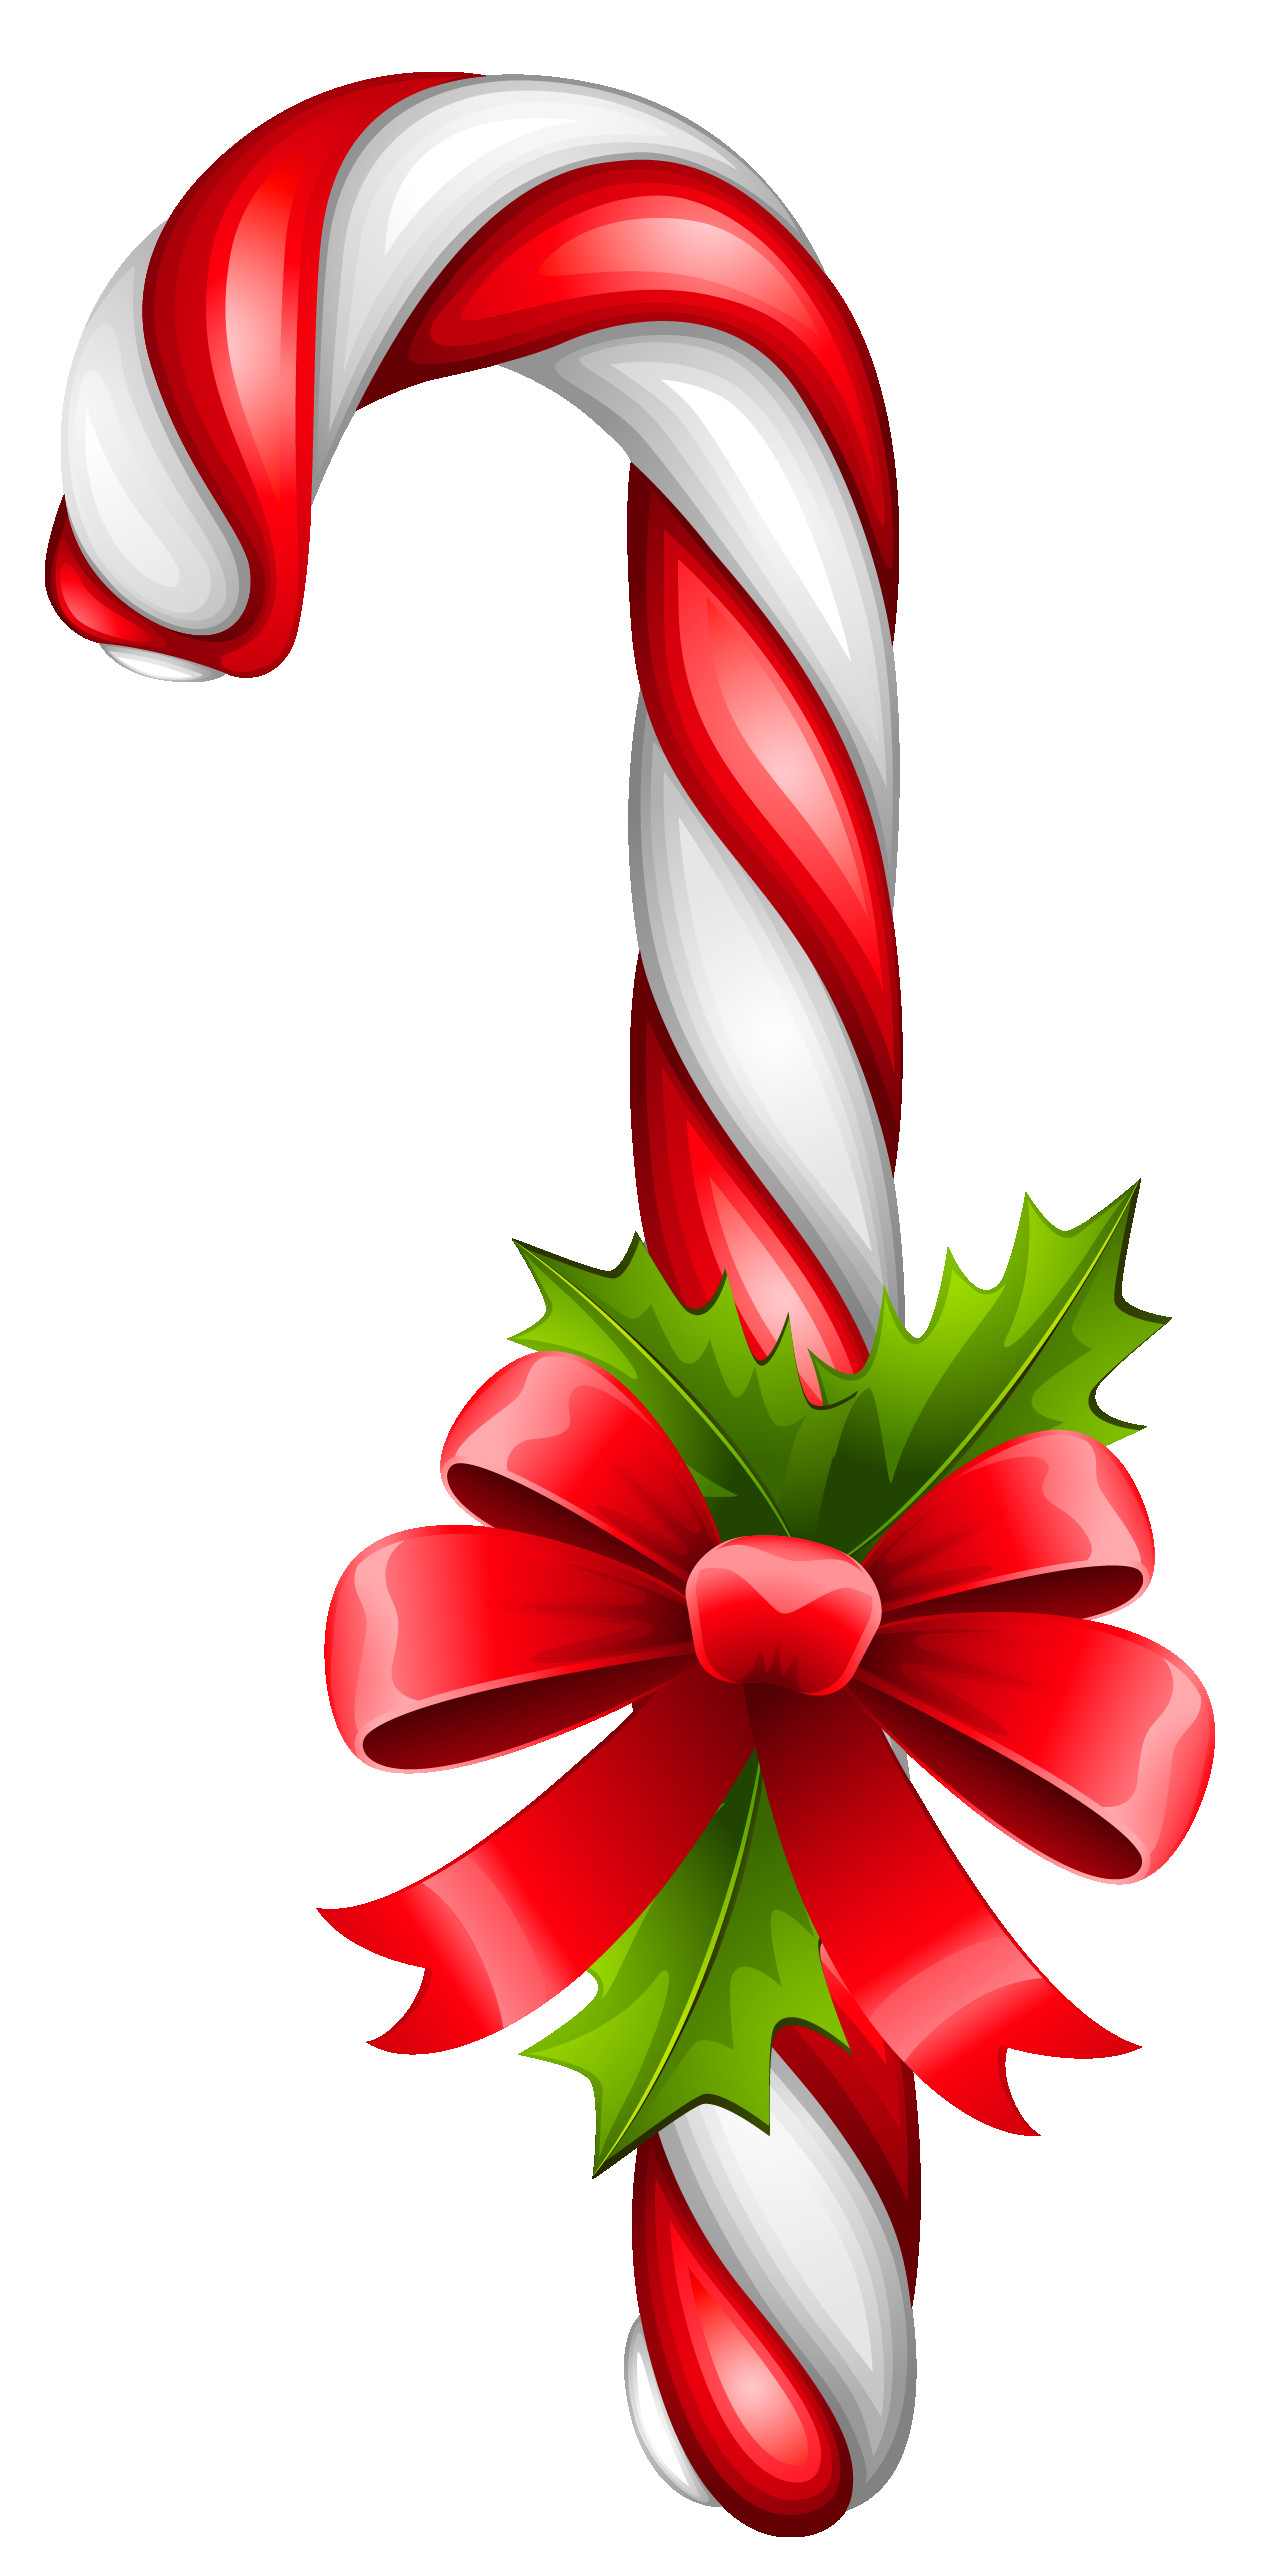 Christmas Candy Cane Clipart
 Free candy cane clipart public domain christmas clip art